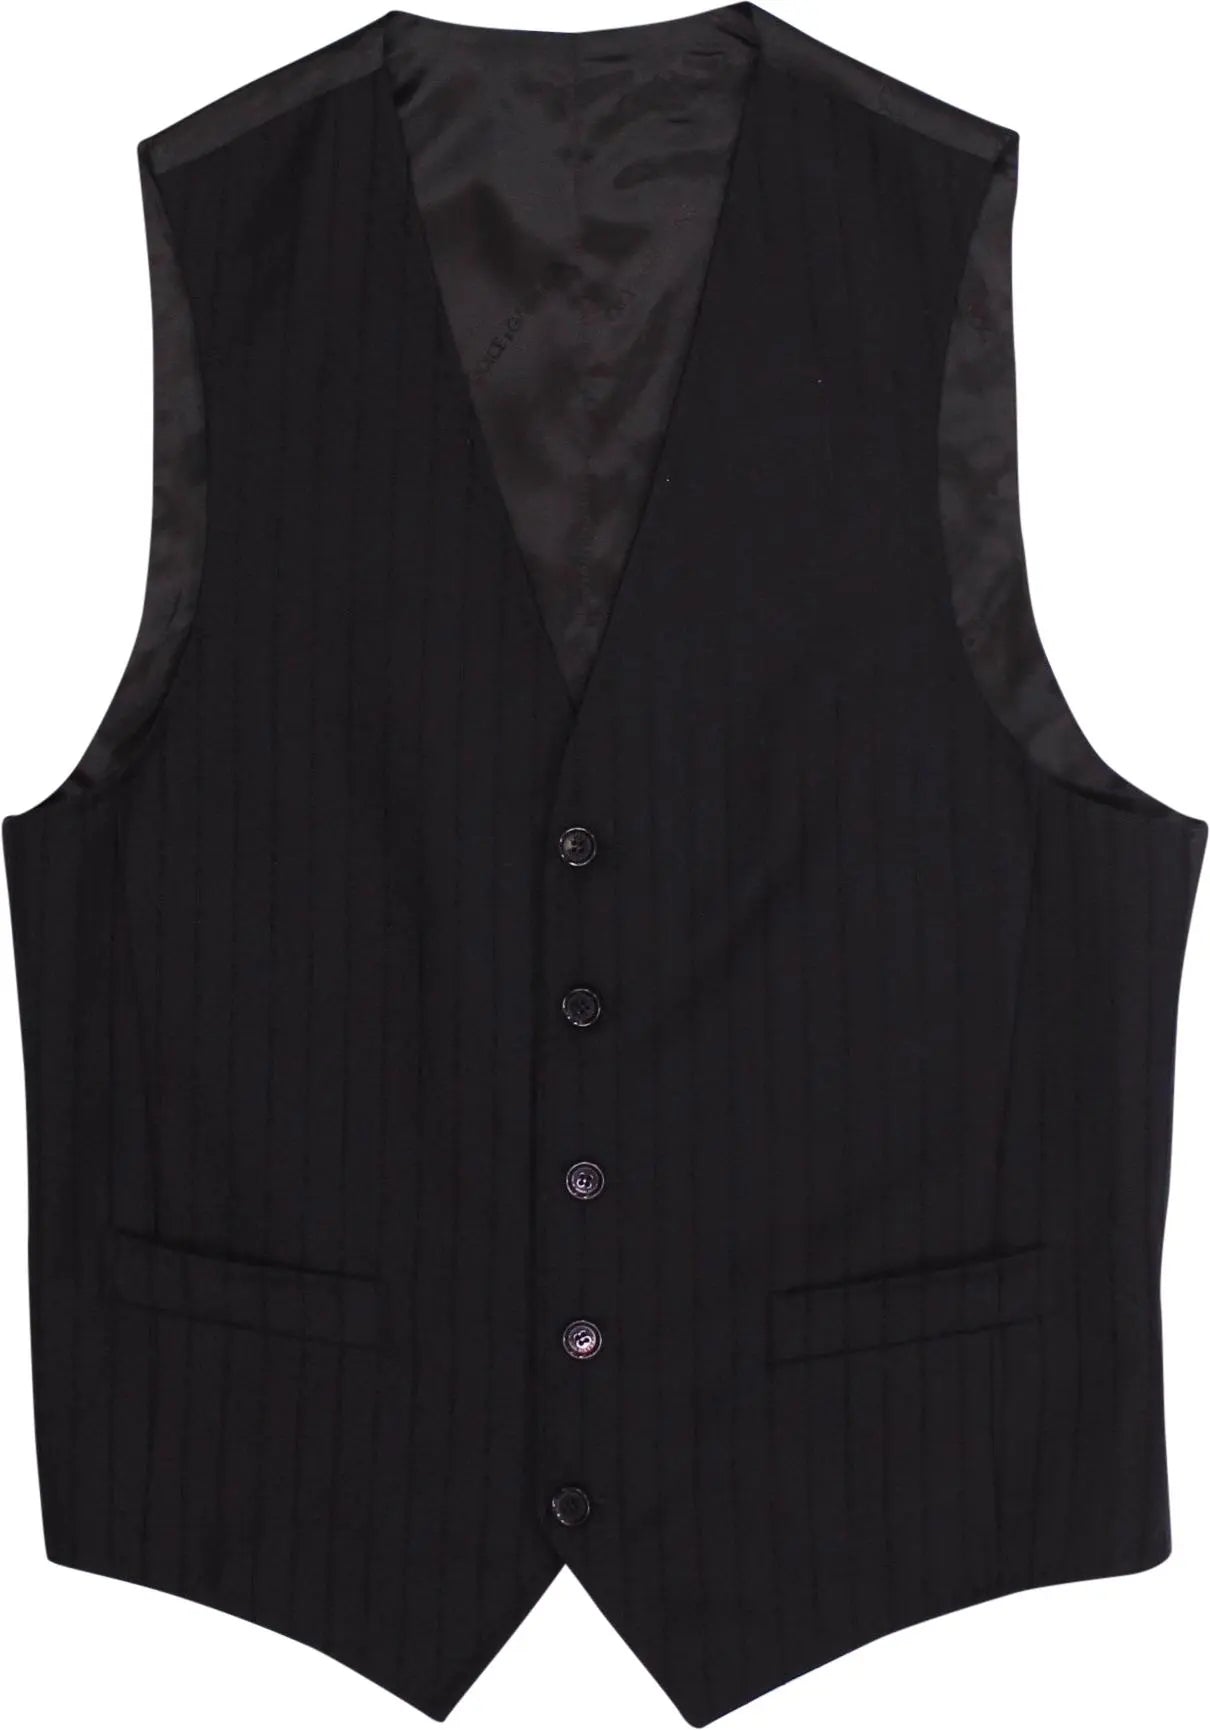 Dolce & Gabbana - Black Sleeveless Vest by Dolce & Gabbana- ThriftTale.com - Vintage and second handclothing